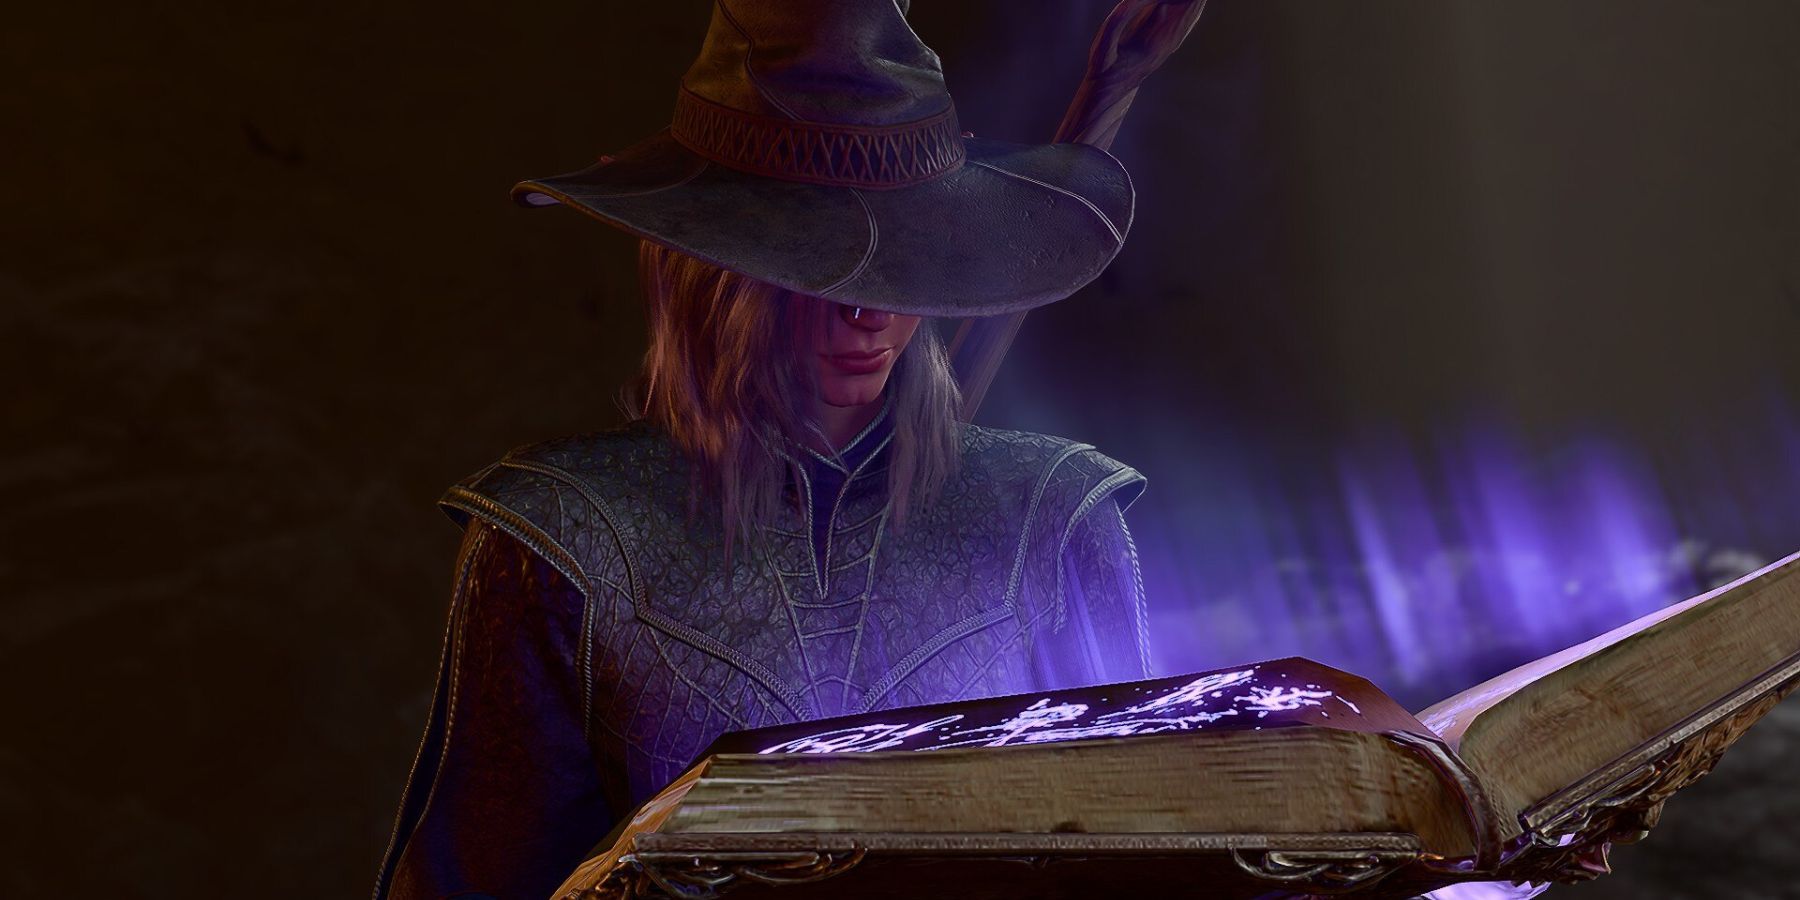 How to Cancel Concentration Spells in Baldur's Gate 3